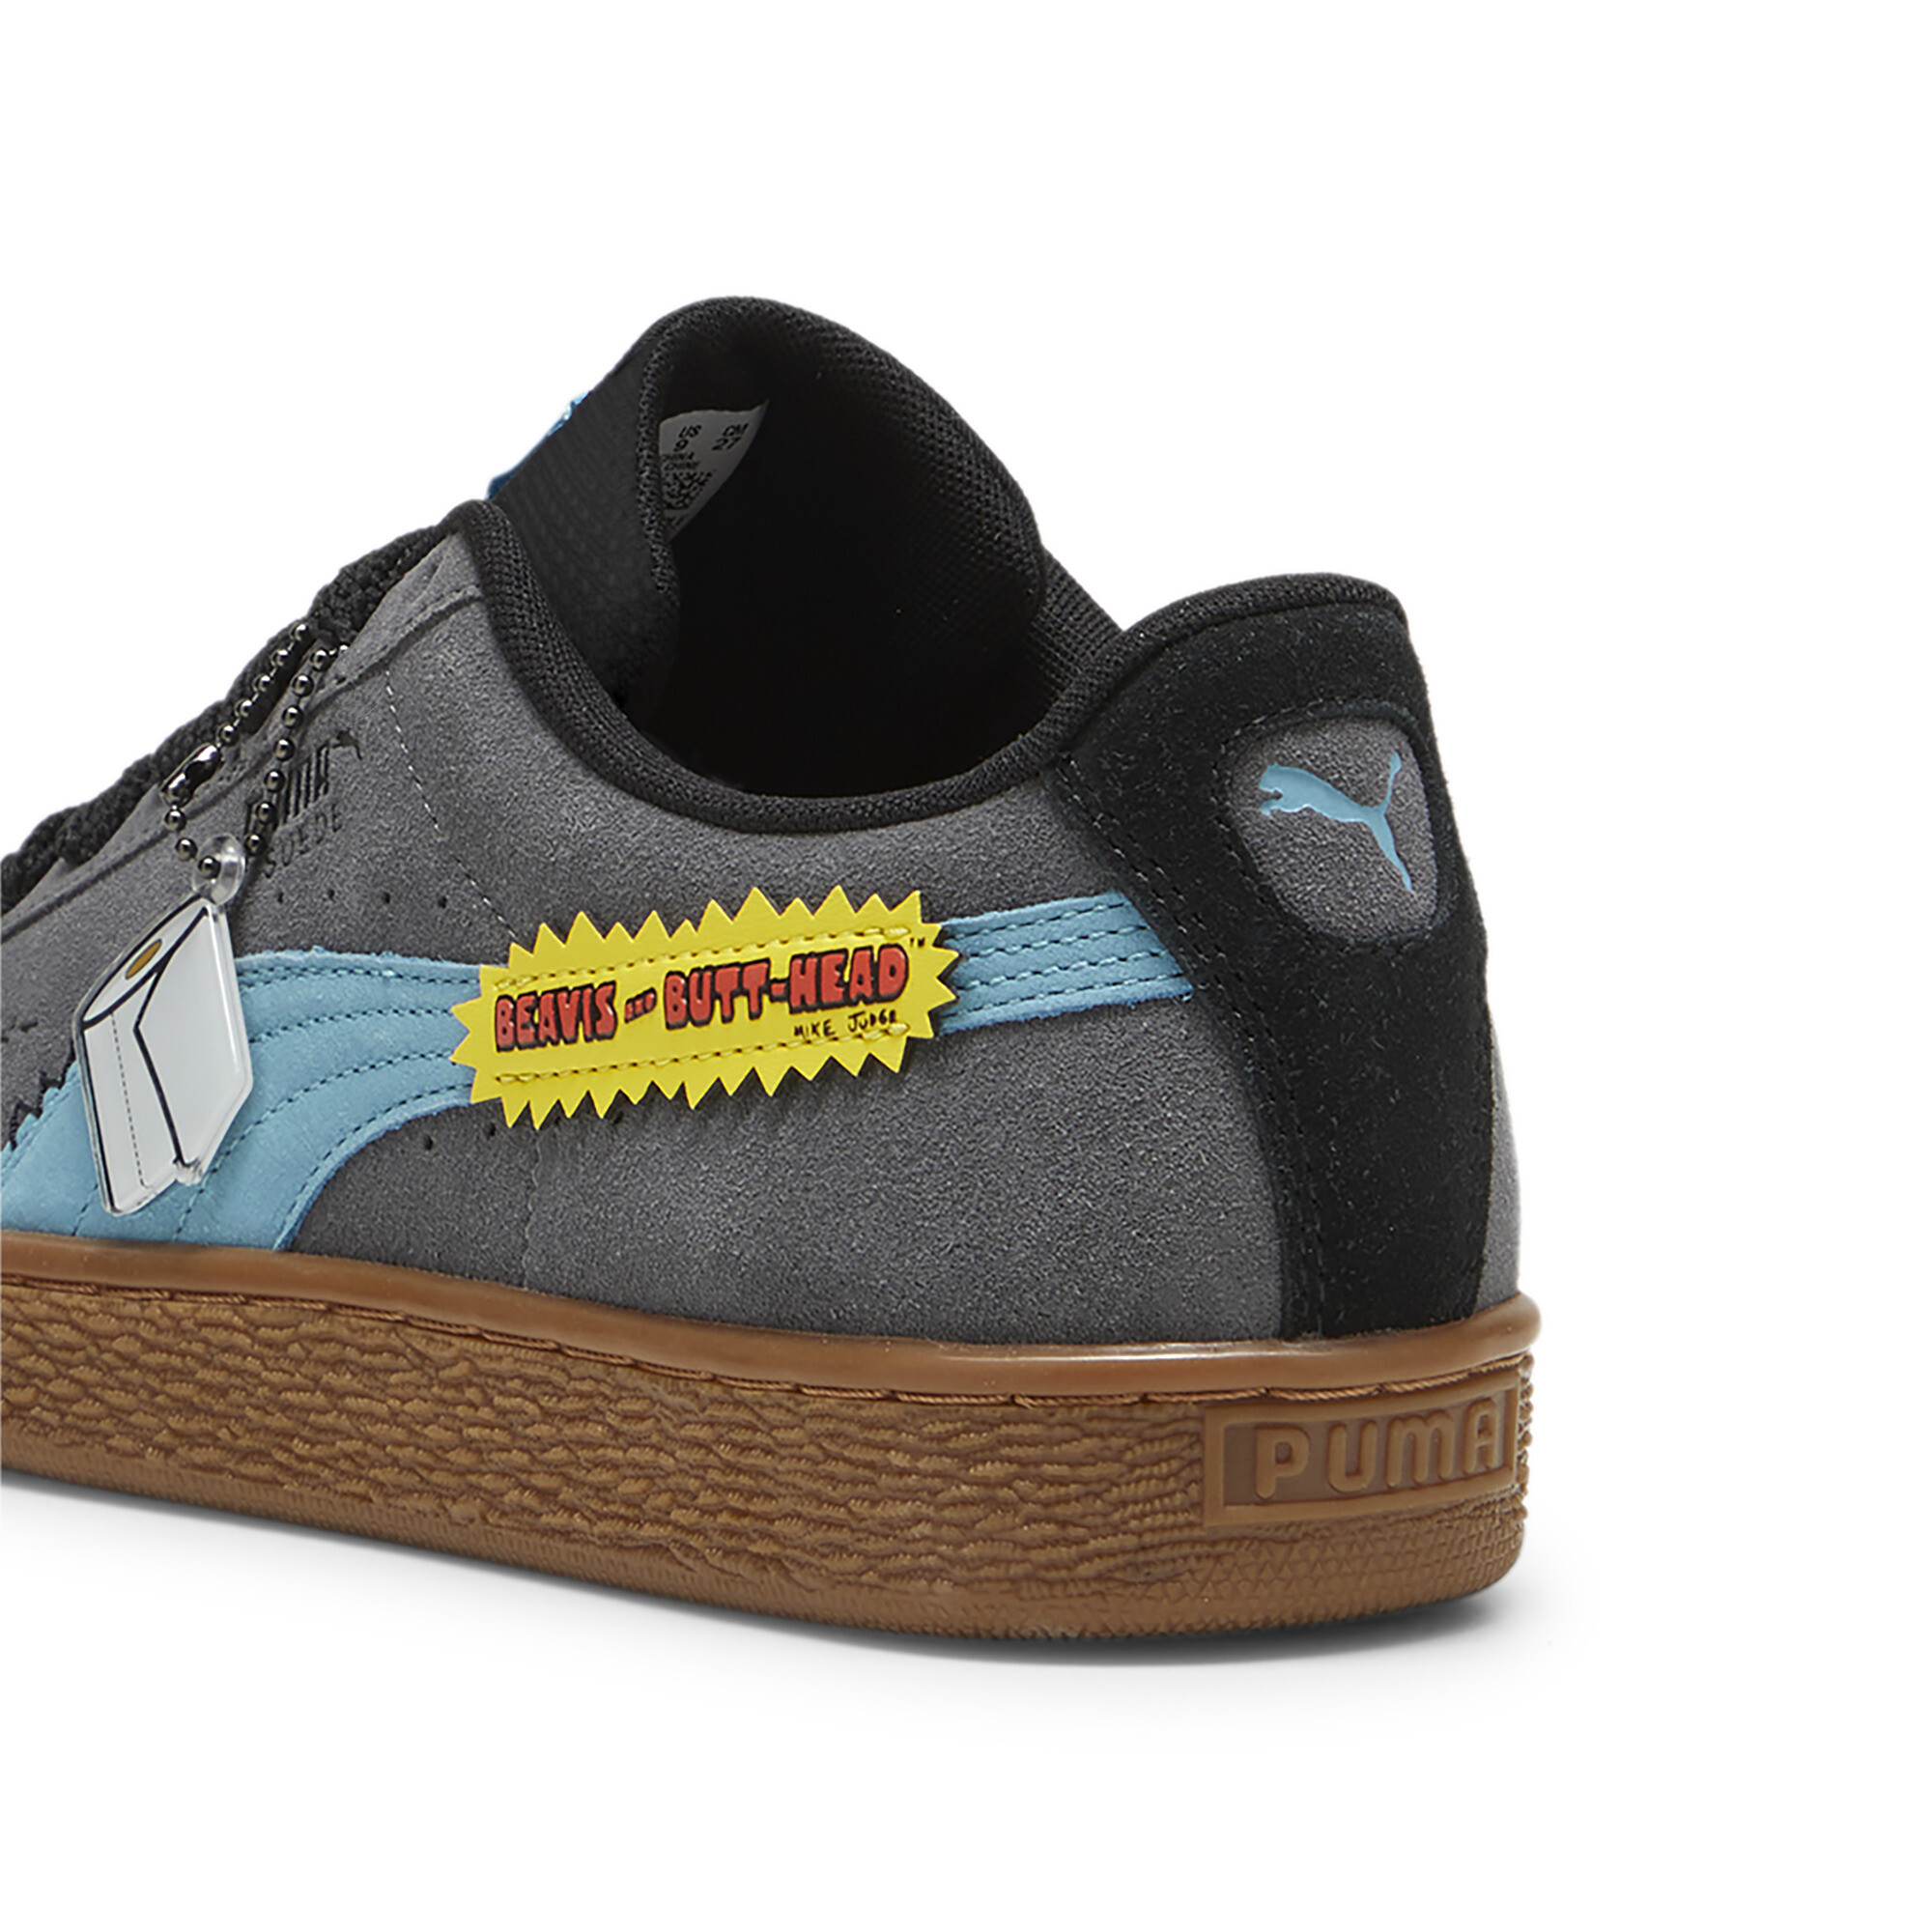 Men's Puma X BEAVIS AND BUTTHEAD Suede Sneakers, Gray, Size 38, Shoes